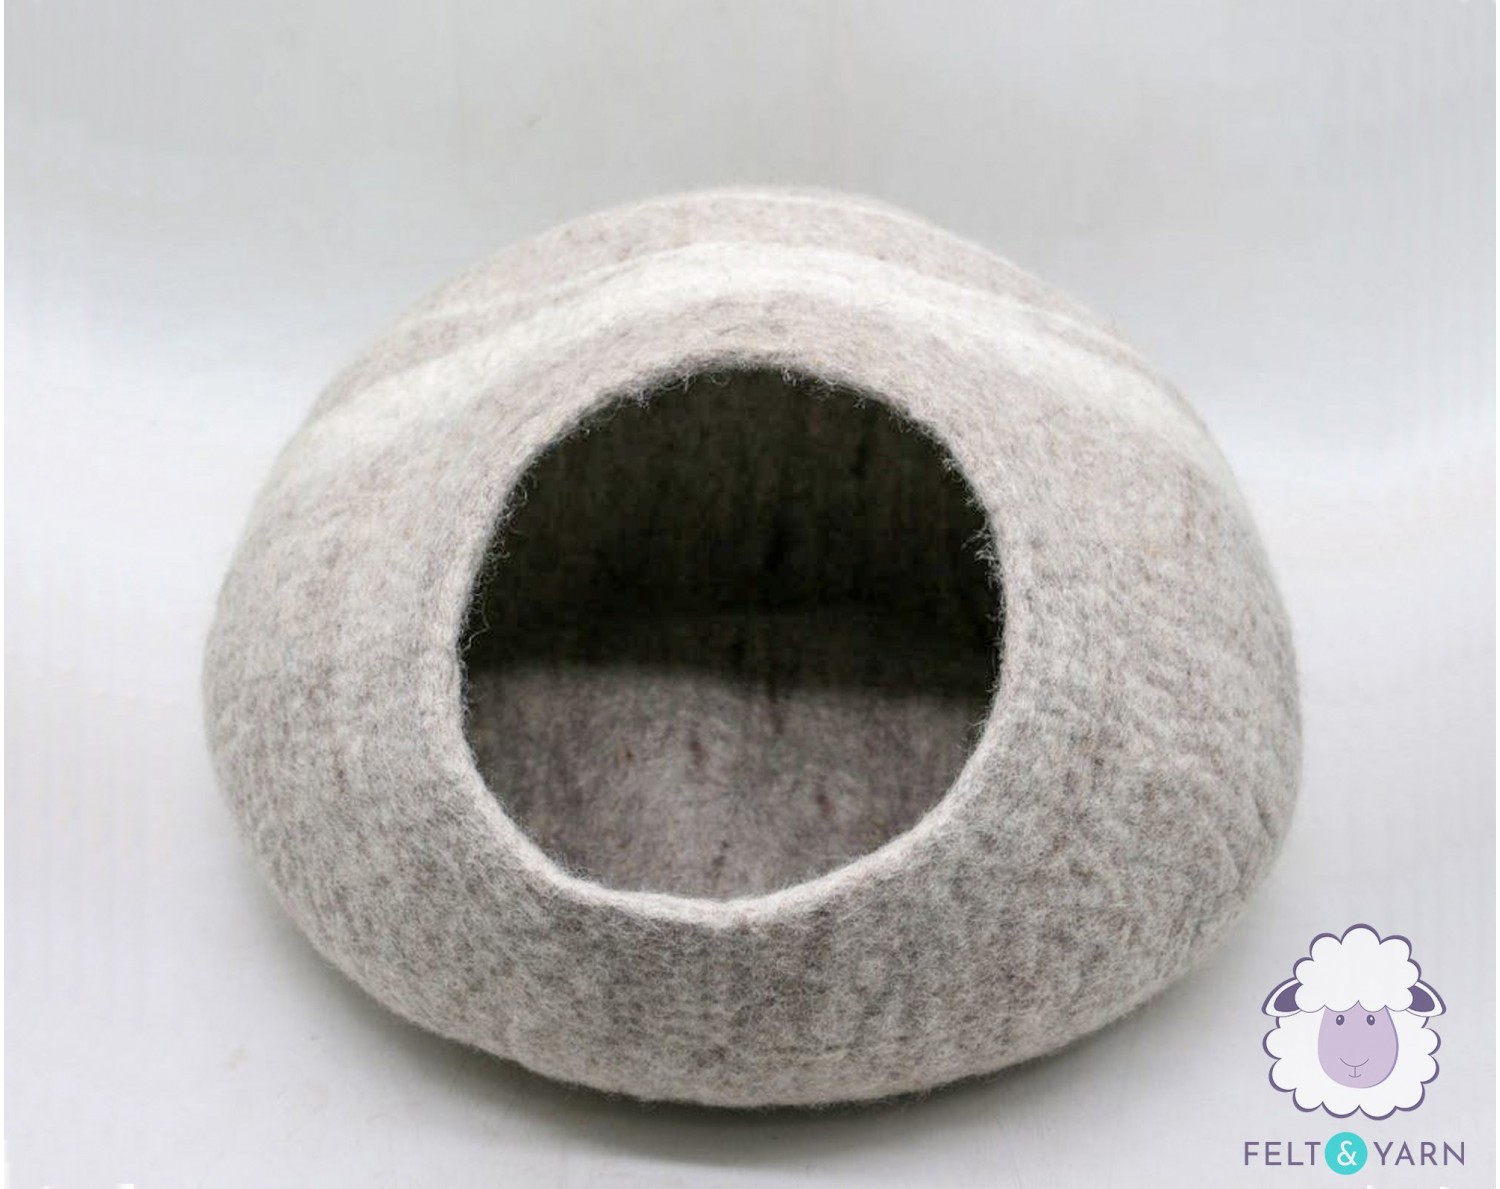 for Indoor Cozy Hideaway Handmade Premium Shaped Felt Makes Great Covered Cat House and Bed for Kitty Purple Rain Tip 100% Natural Wool Large Cat Cave Large Pod Soft Hooded Bed Area.